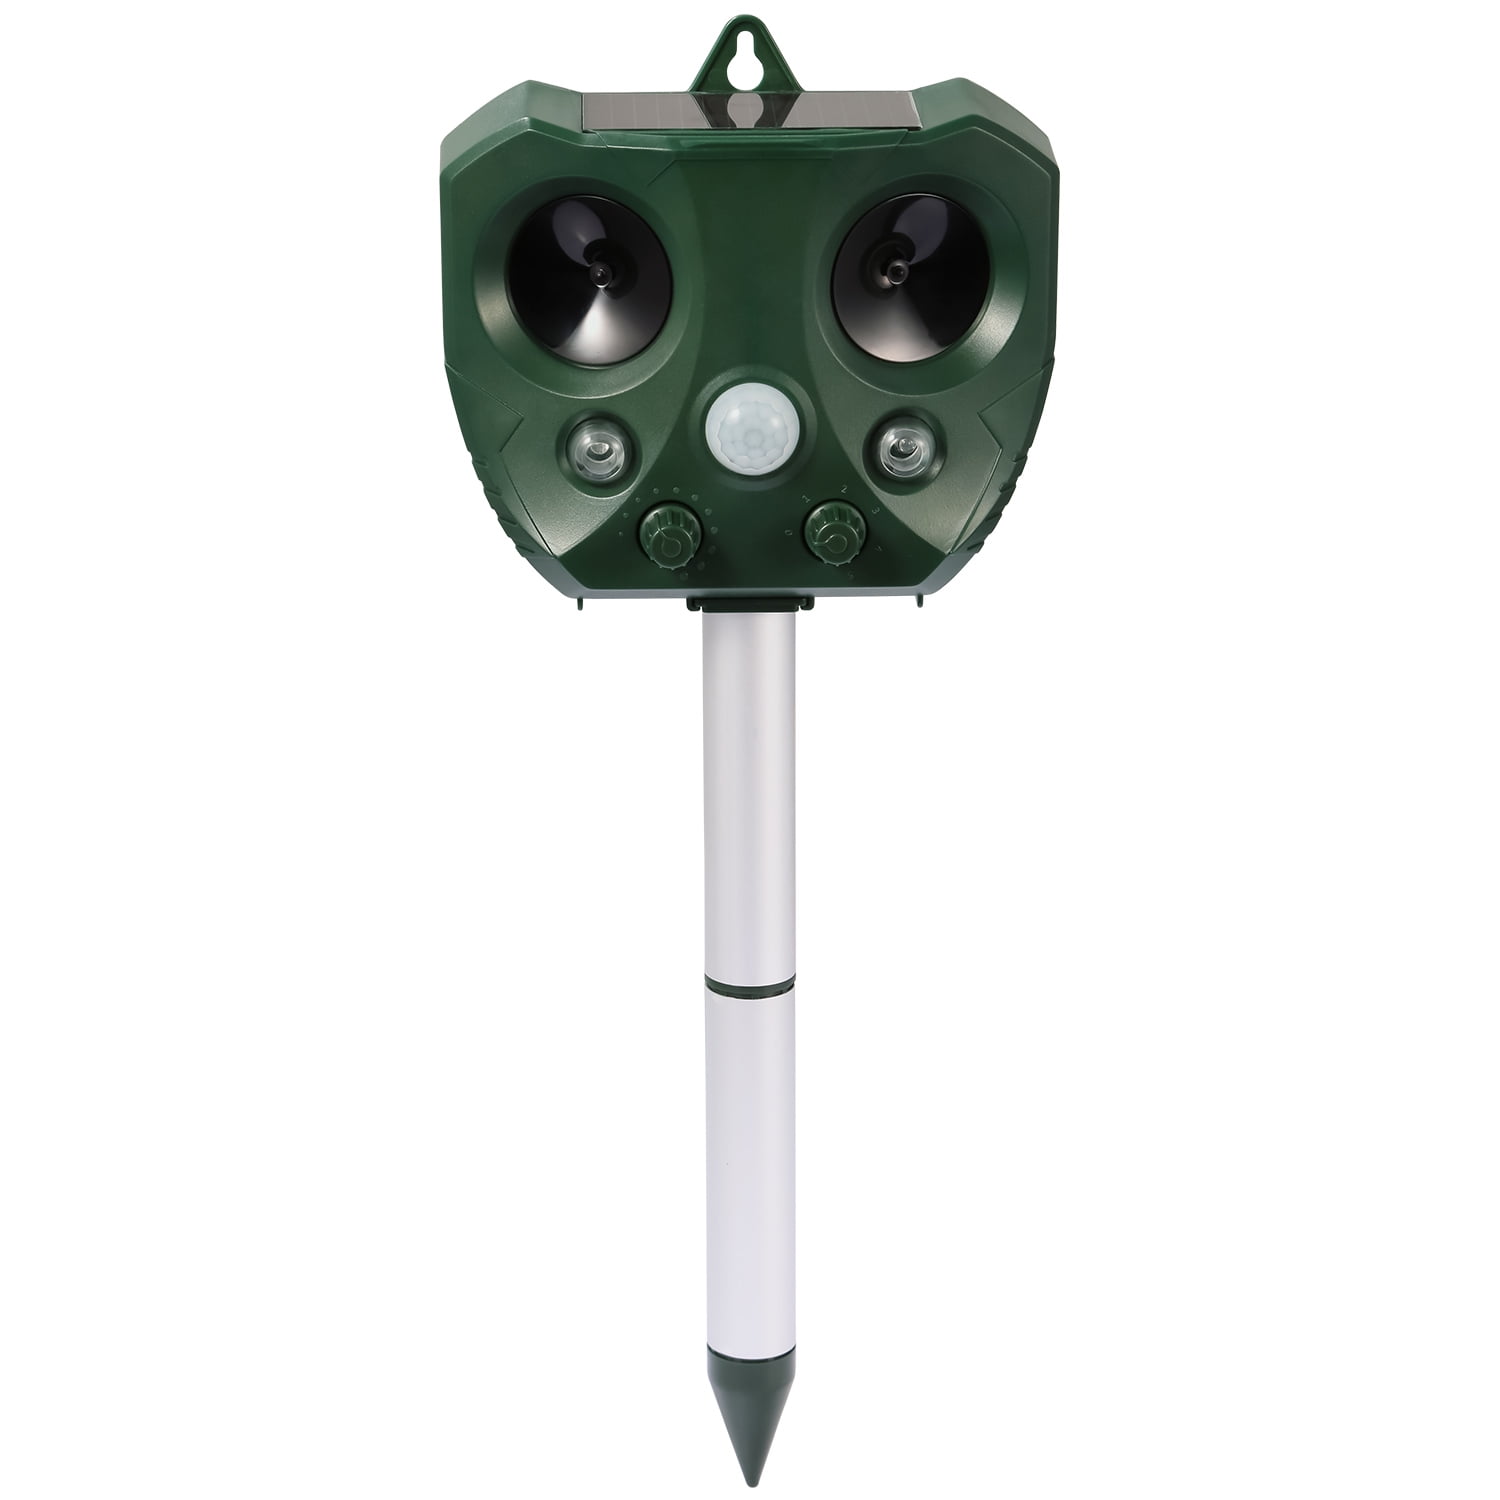 BSI Multistop Outdoor Plus - Ultrasonic + Flash Light + Alarm - For  repelling cats, dogs, wildlife and birds - Range up to 500m²